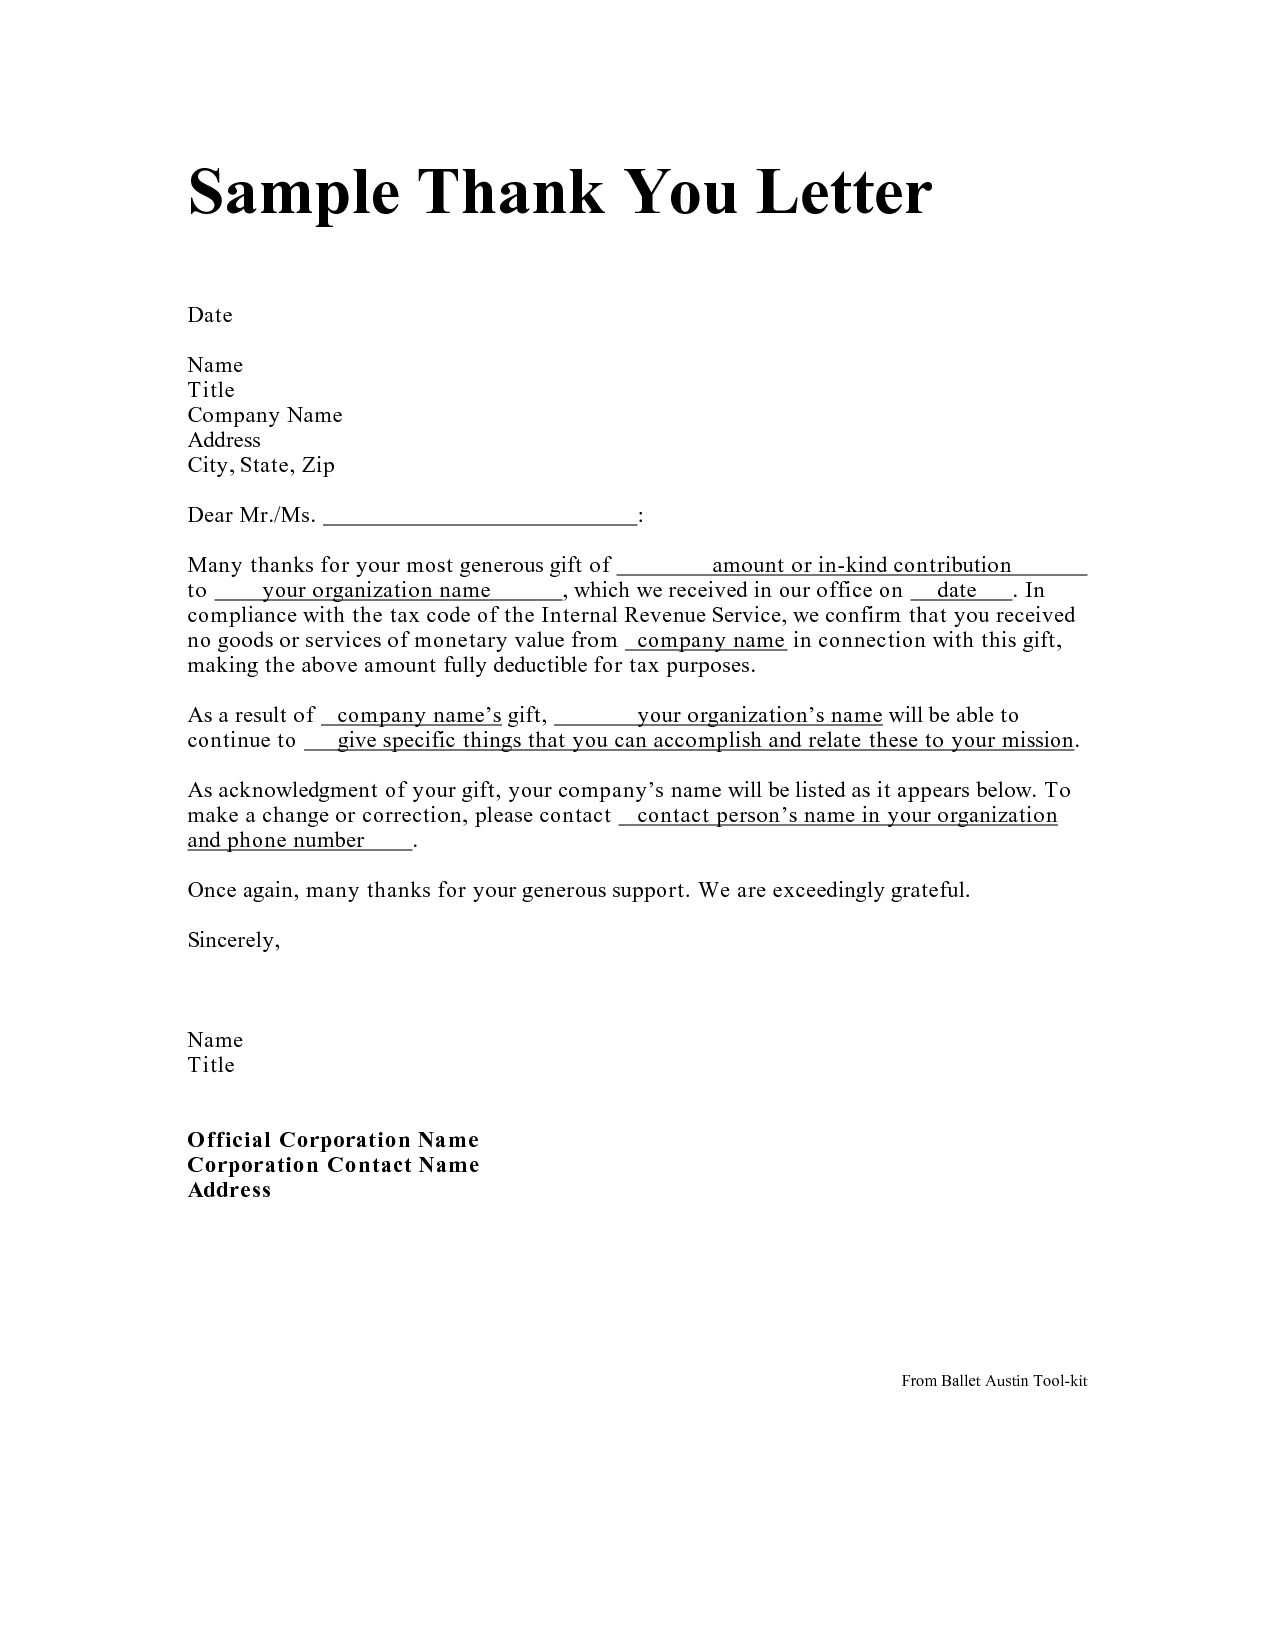 Donation Thank You Letter Template